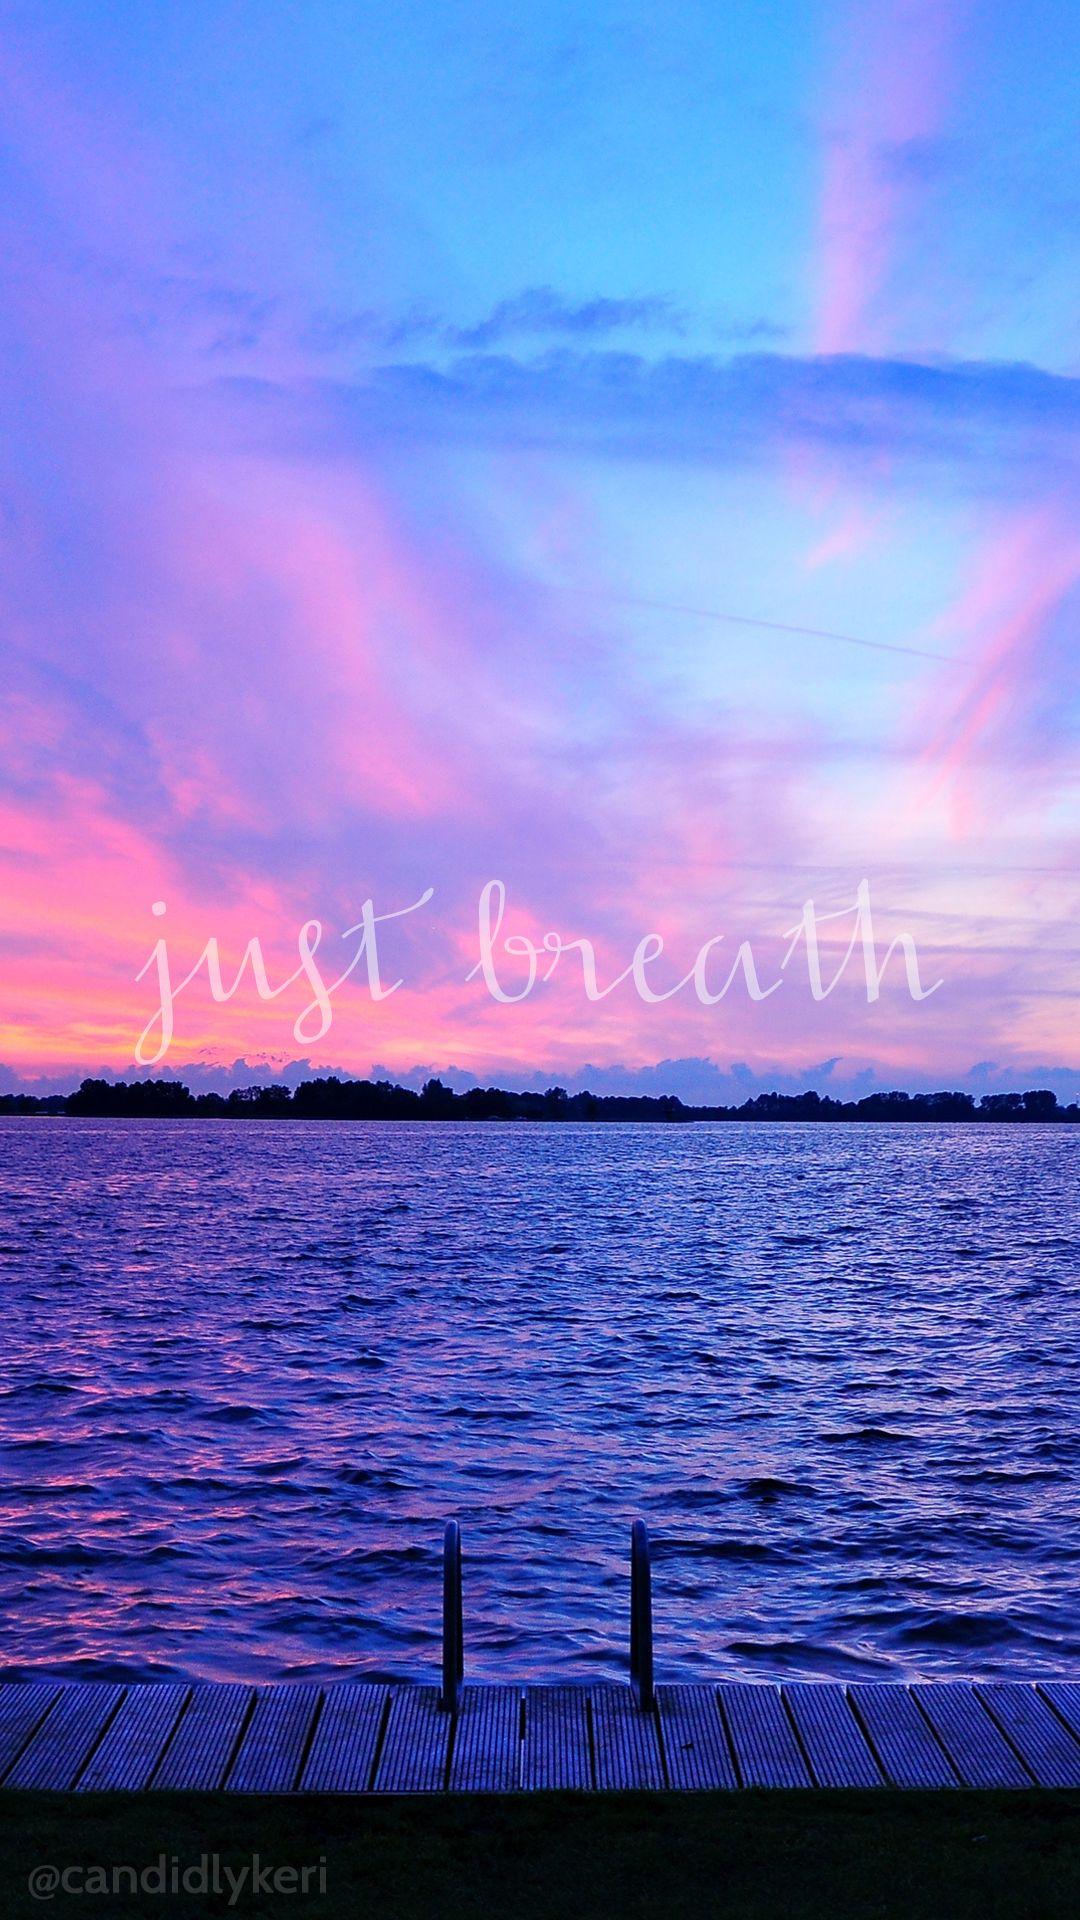 Just Breathe sunset ocean view pink and purple sky wallpaper download for free iphone background. Background phone wallpaper, Ocean wallpaper, Wallpaper gallery